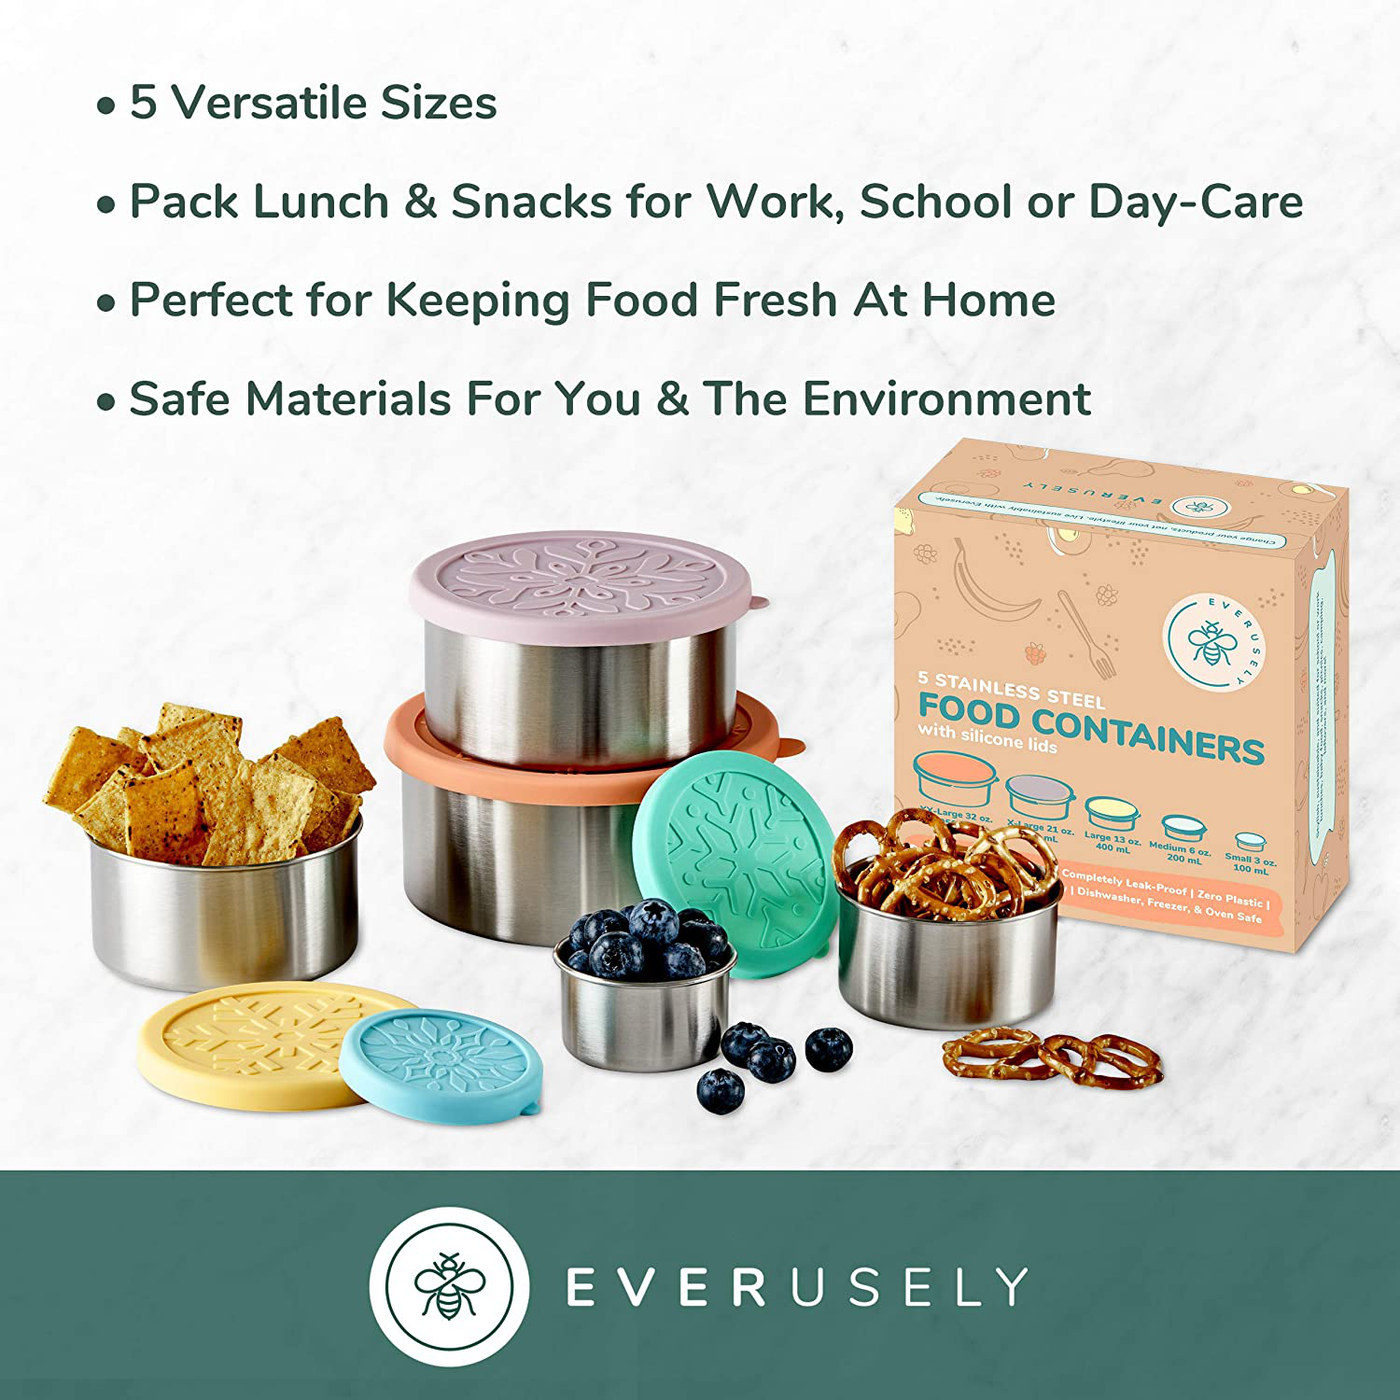 Everusely Stainless Steel Food Containers With Lids, Reusable Snack Containers, Stainless Steel Lunch Container, Metal Food Containers, Stainless Steel Food Storage Containers, Bento Box, Lunch Box